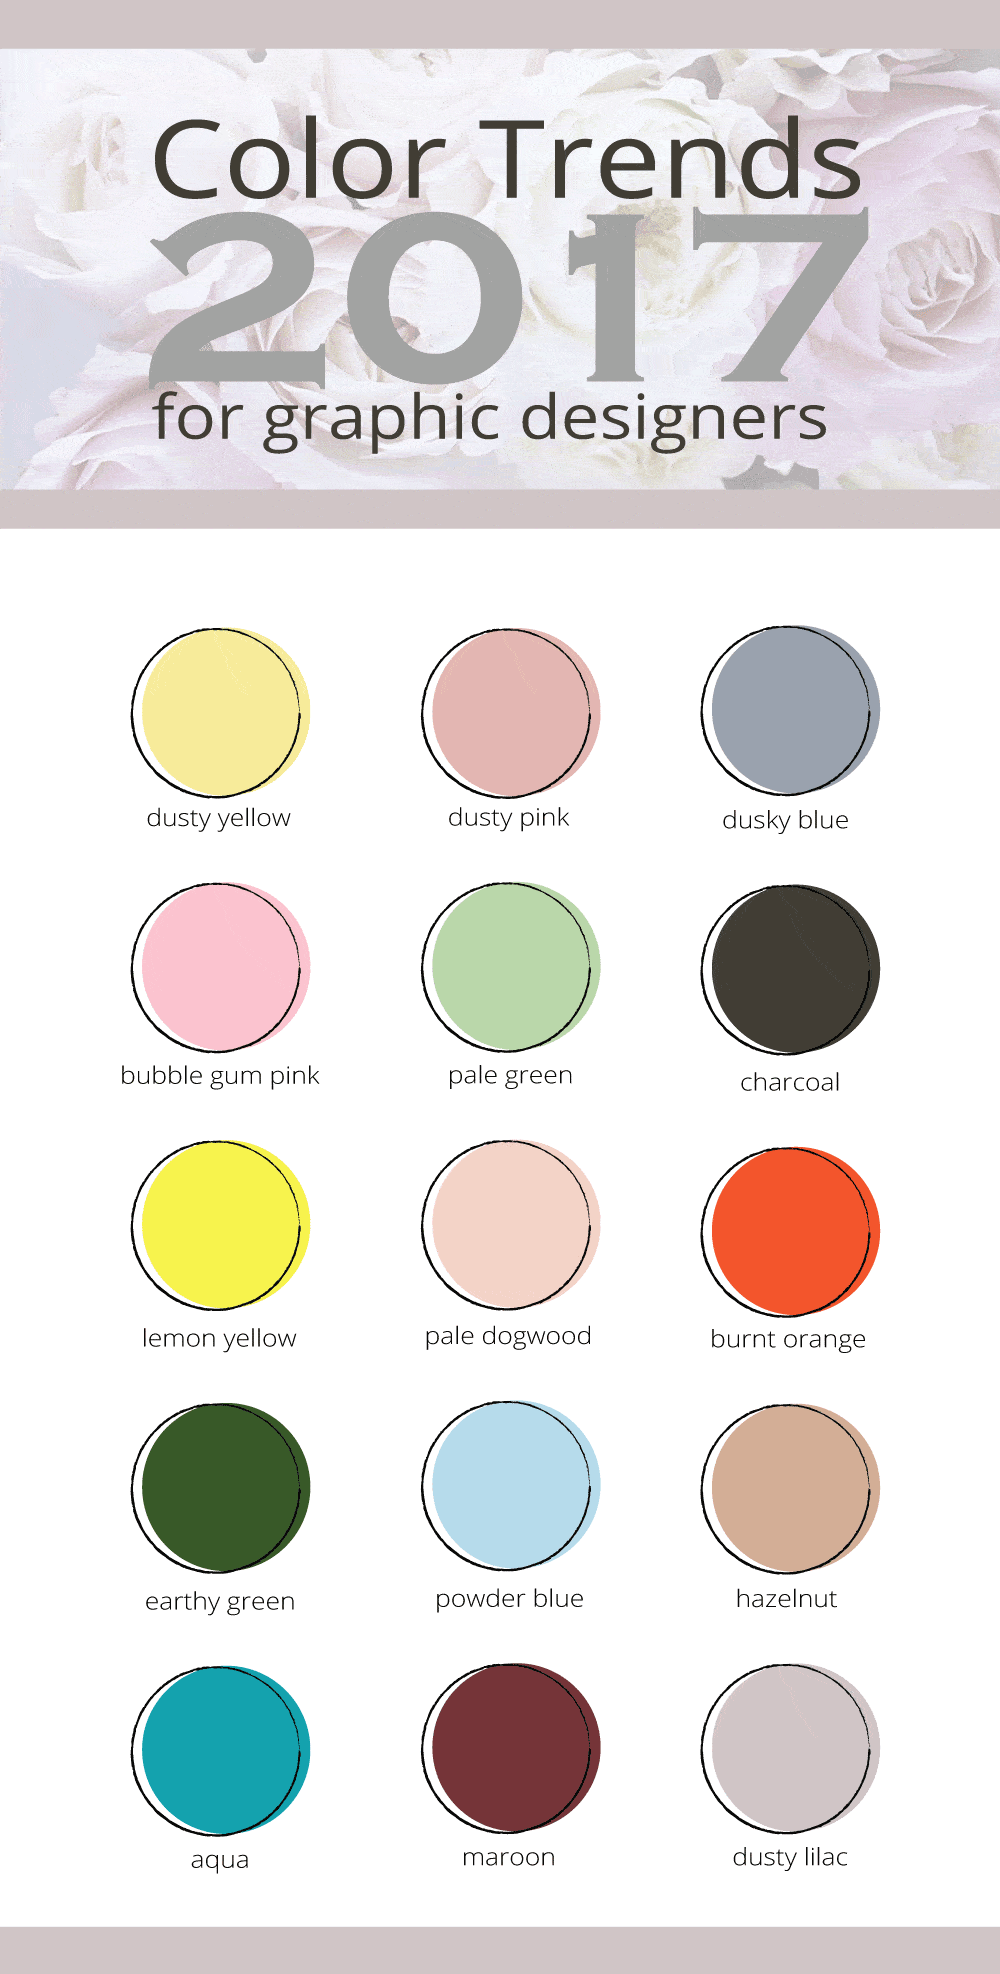 infographic showing 2017 color trends